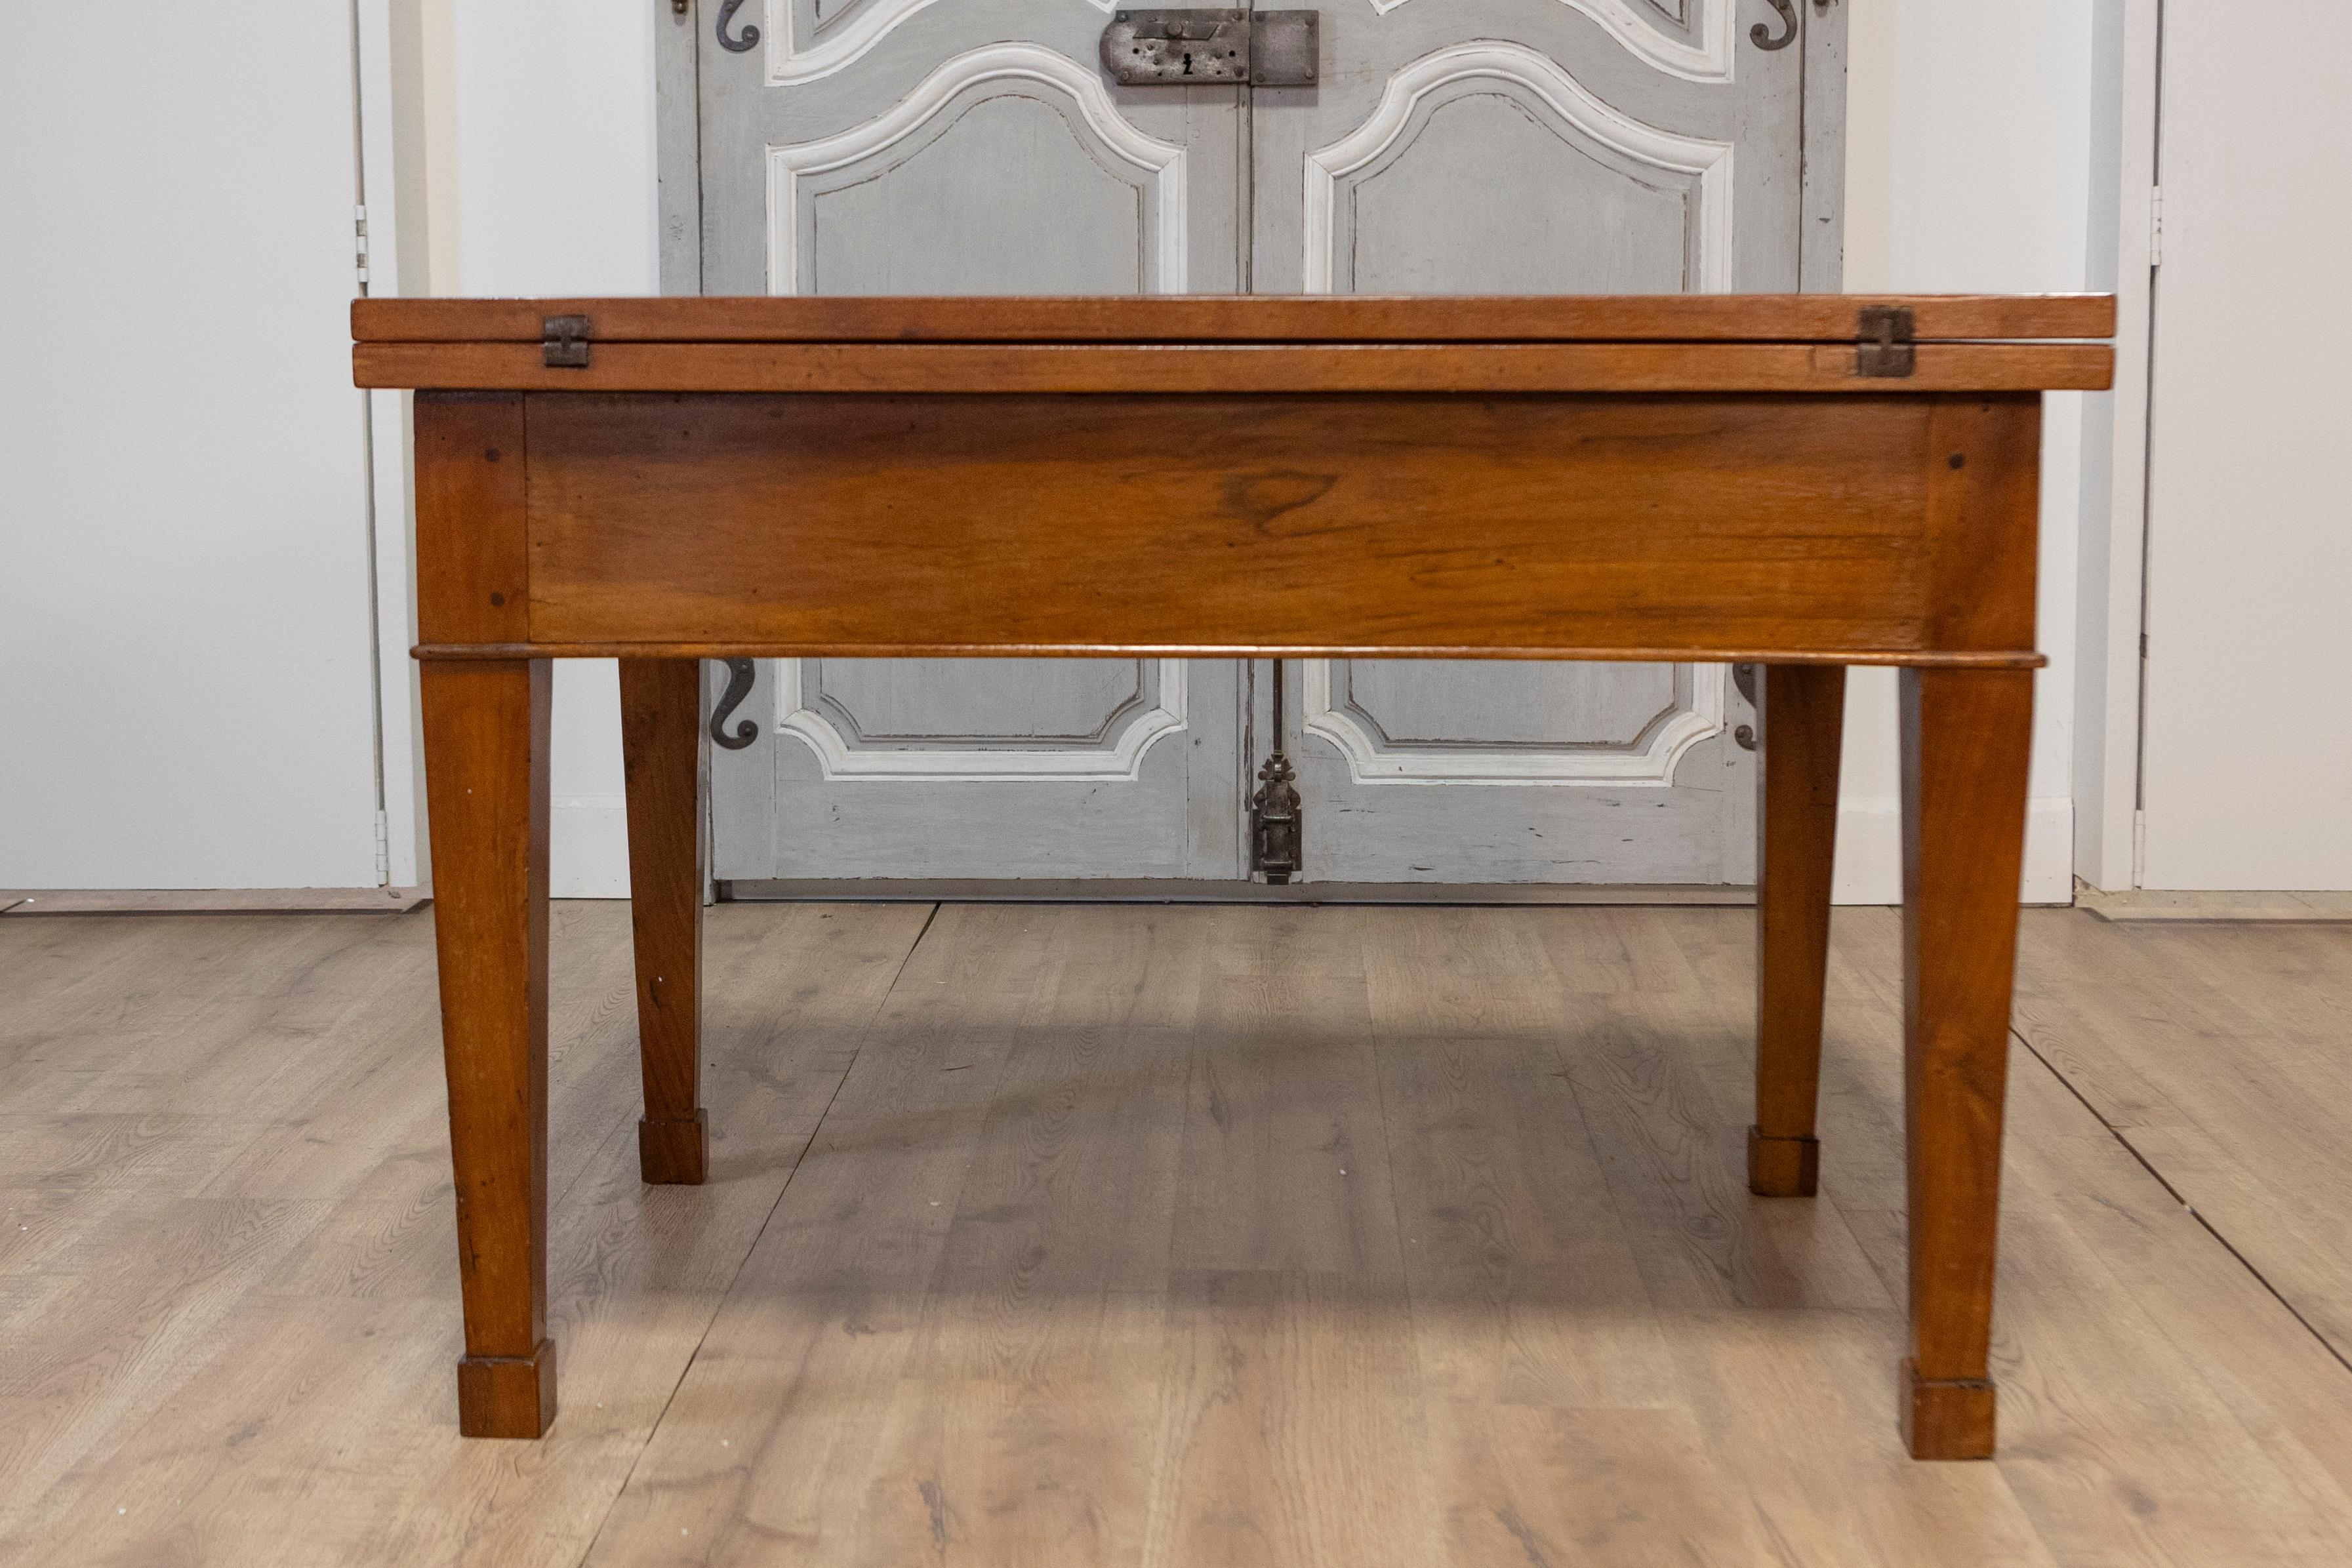 Italian Early 19th Century Walnut Folding Table with Tapered Legs For Sale 3